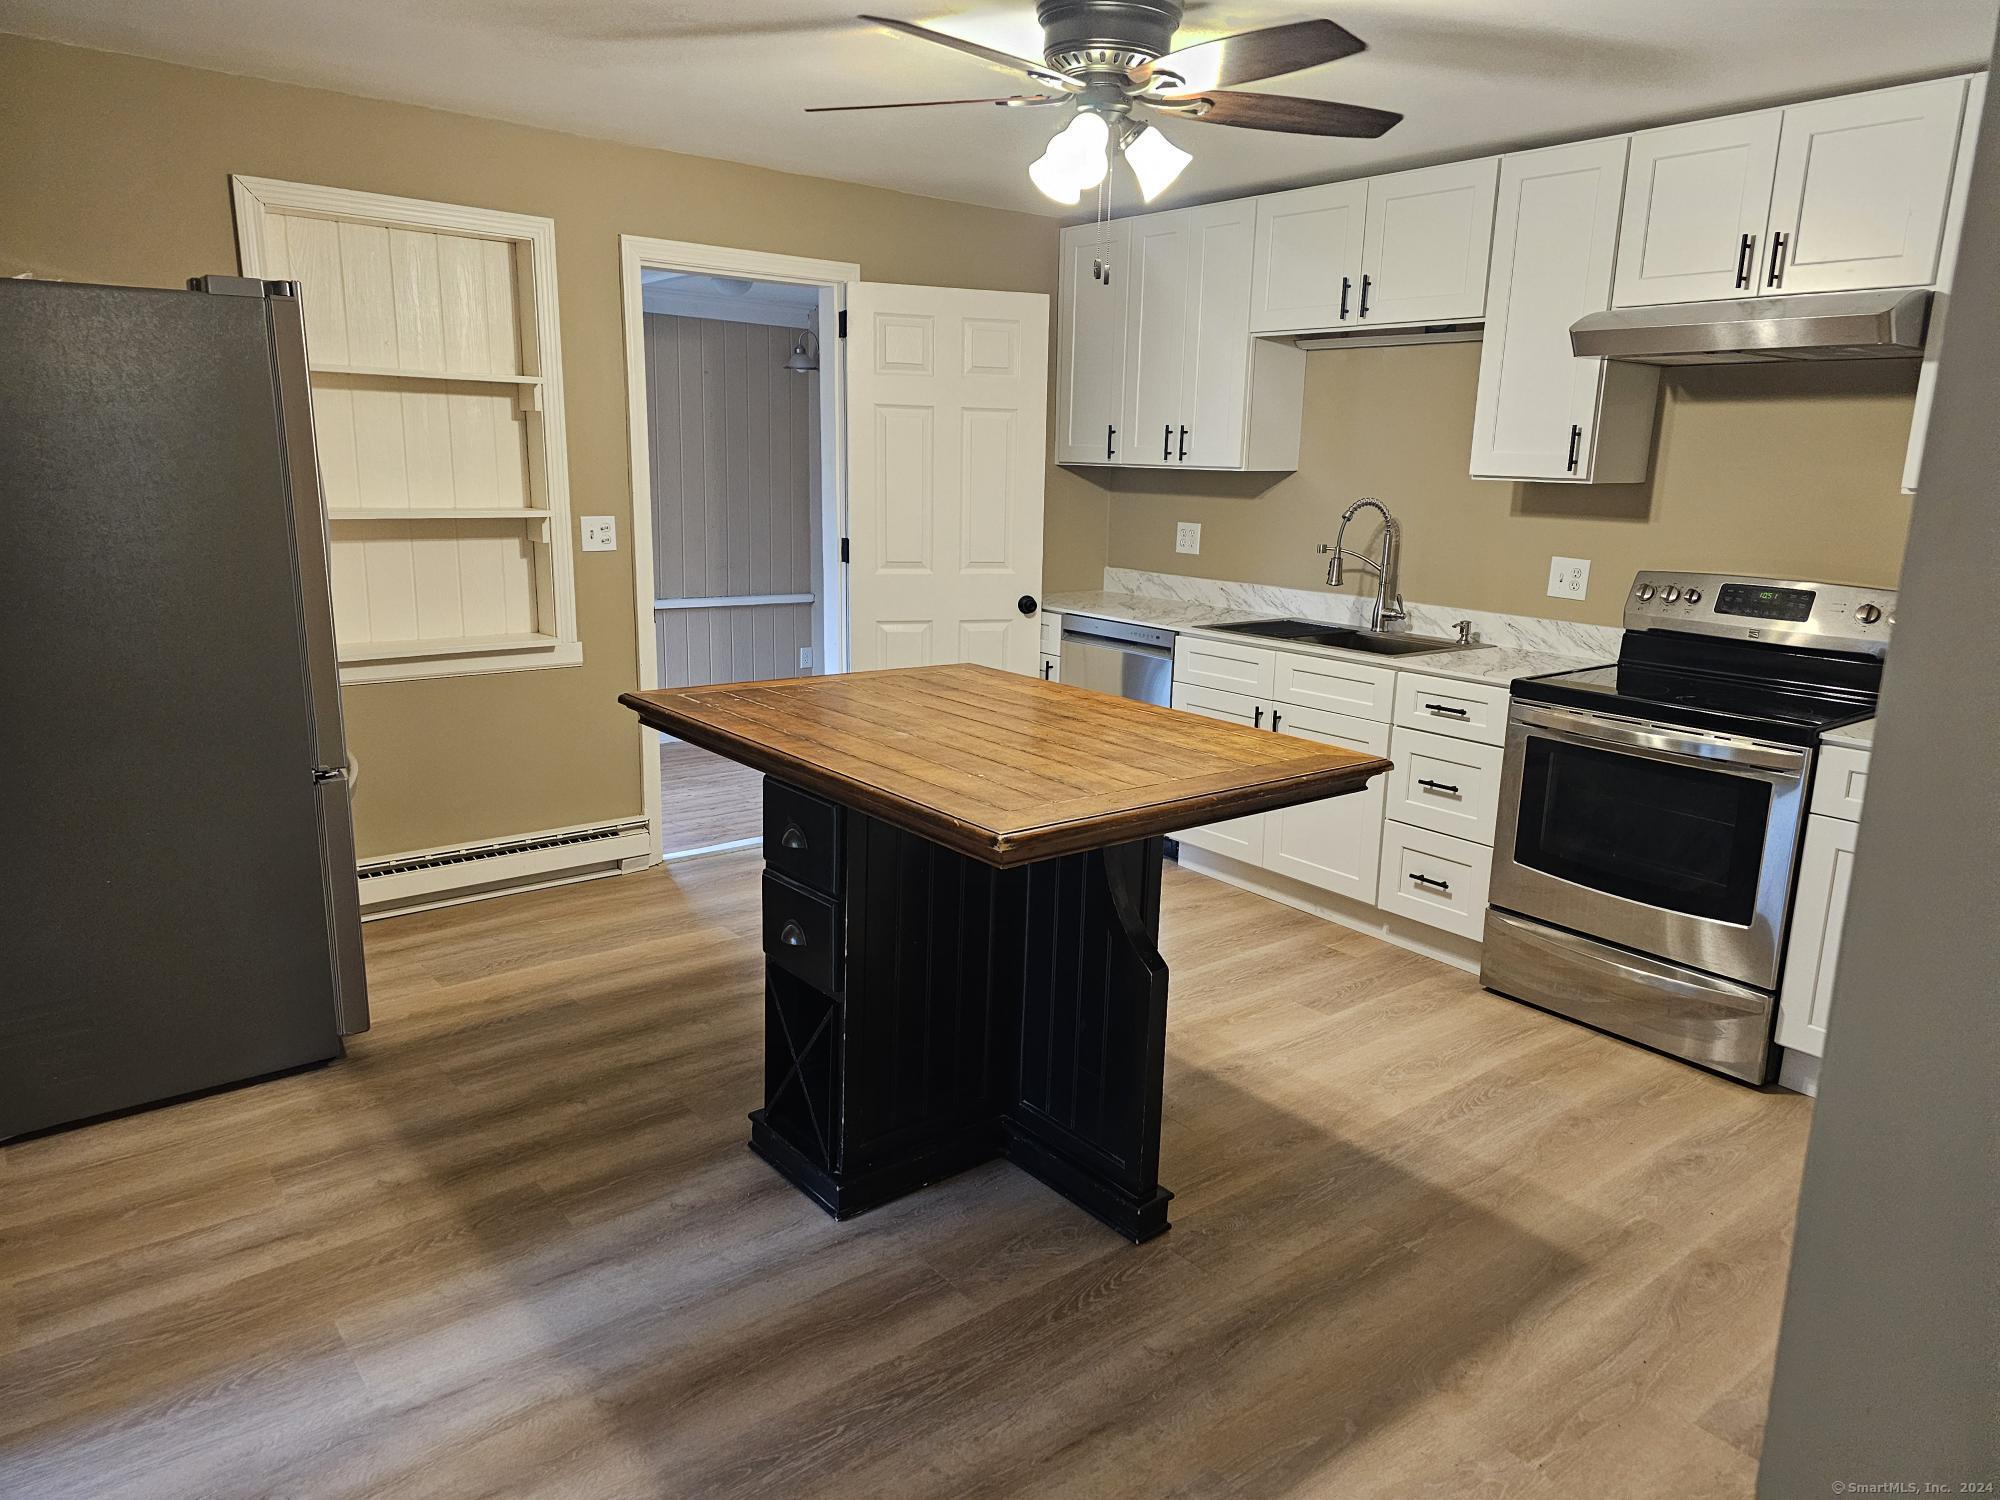 a kitchen with stainless steel appliances granite countertop a stove a sink dishwasher and a refrigerator with wooden floor